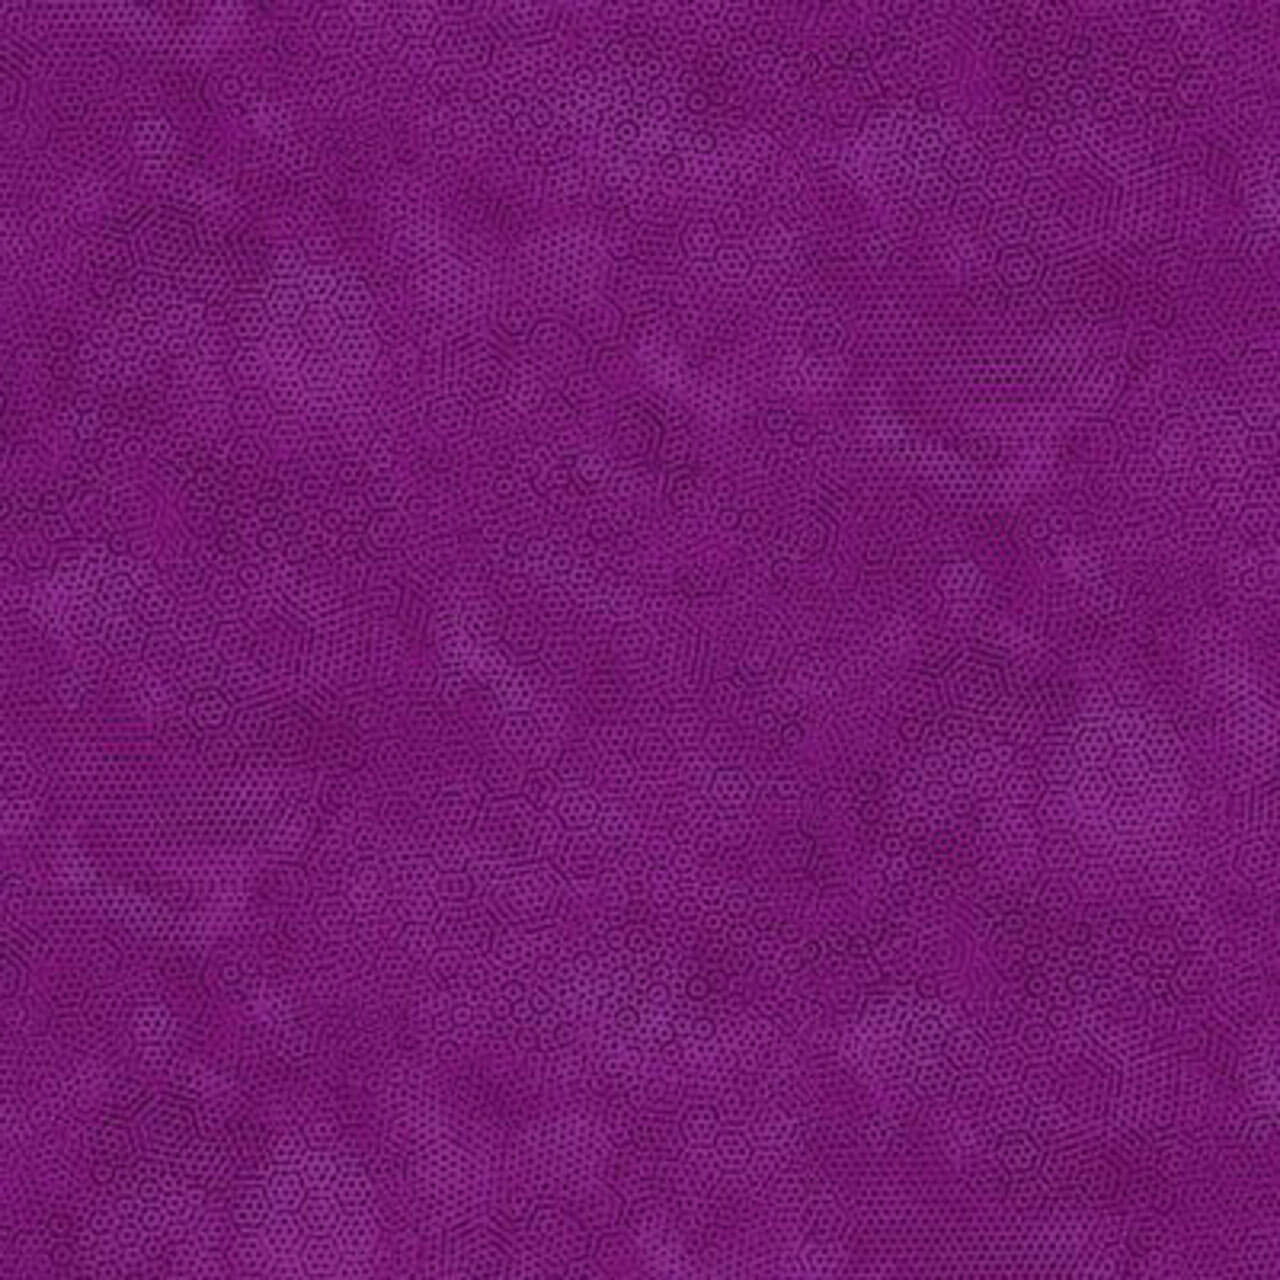 Fabric Sample of Andover Fabrics Dimples Collection in Dark Orchid